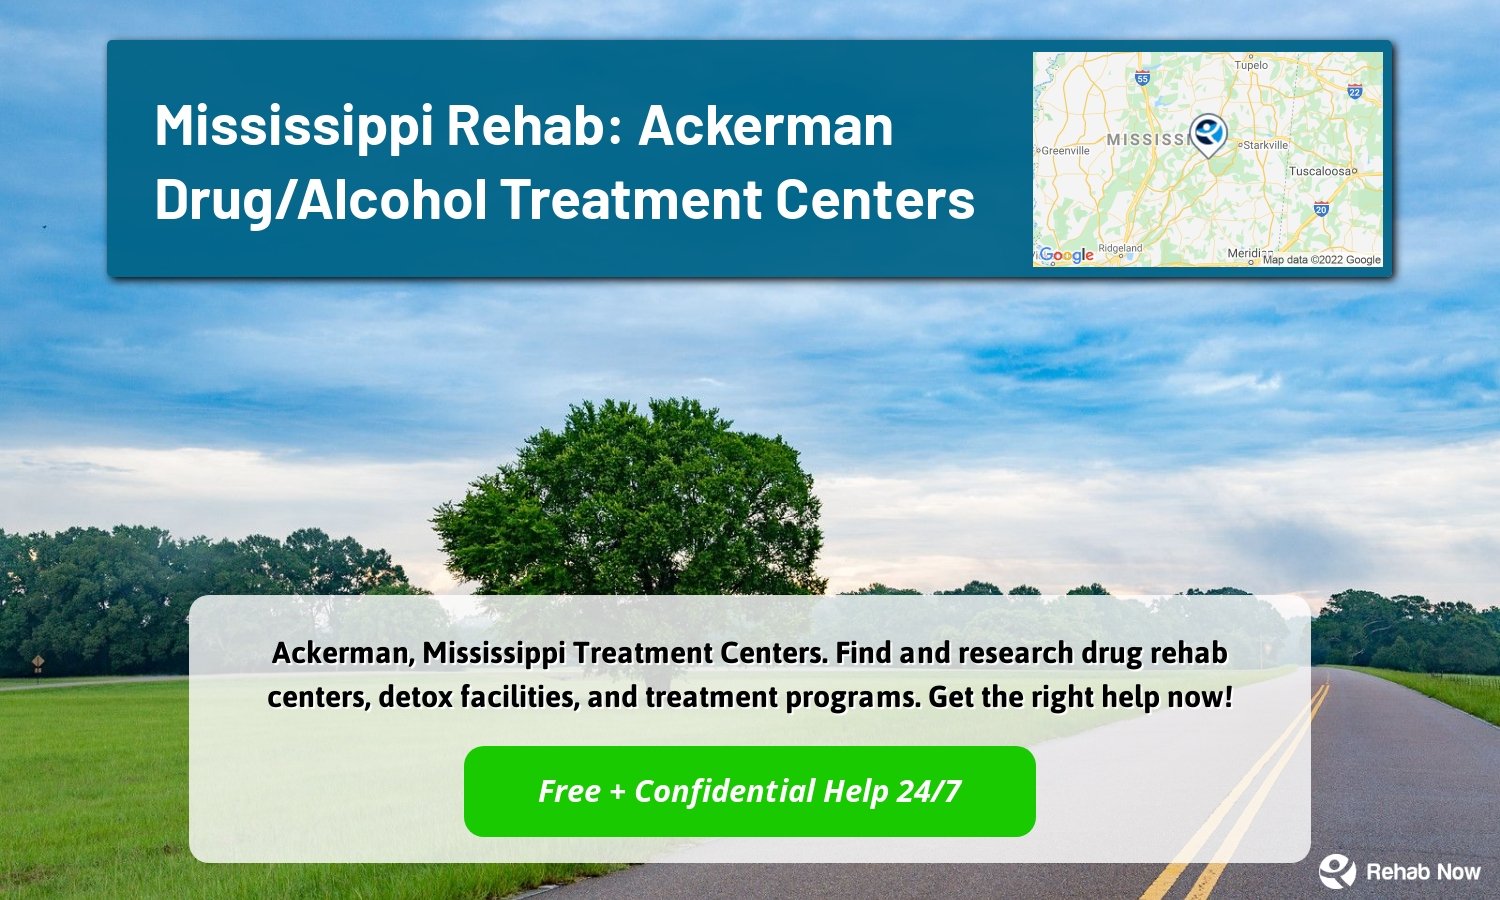 Ackerman, Mississippi Treatment Centers. Find and research drug rehab centers, detox facilities, and treatment programs. Get the right help now!